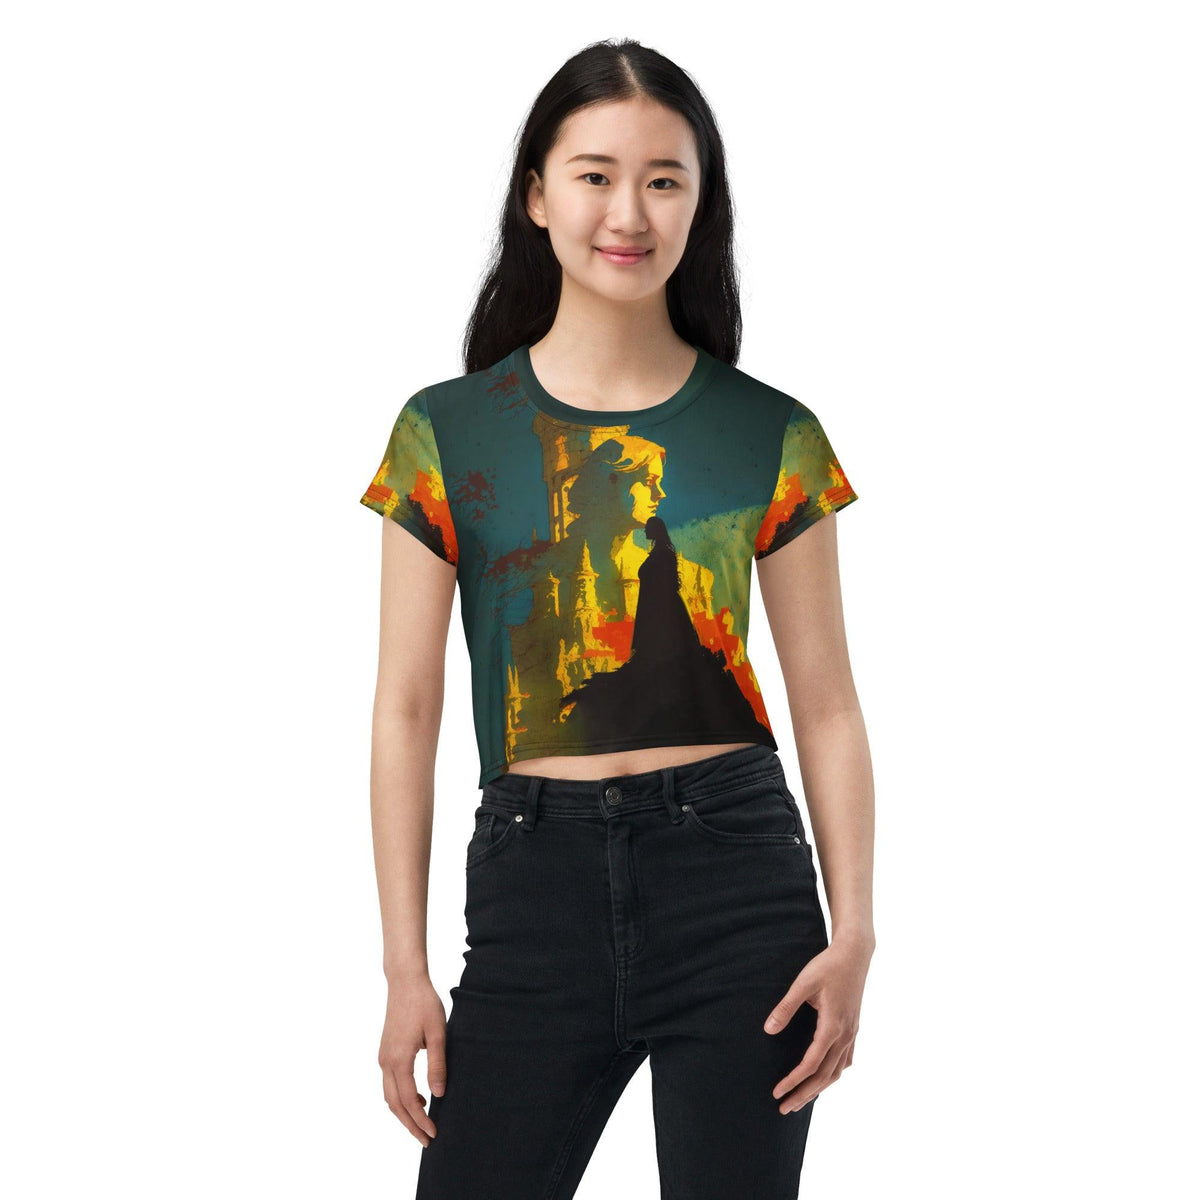 SurArt 68 vibrant all-over print crop tee front view.